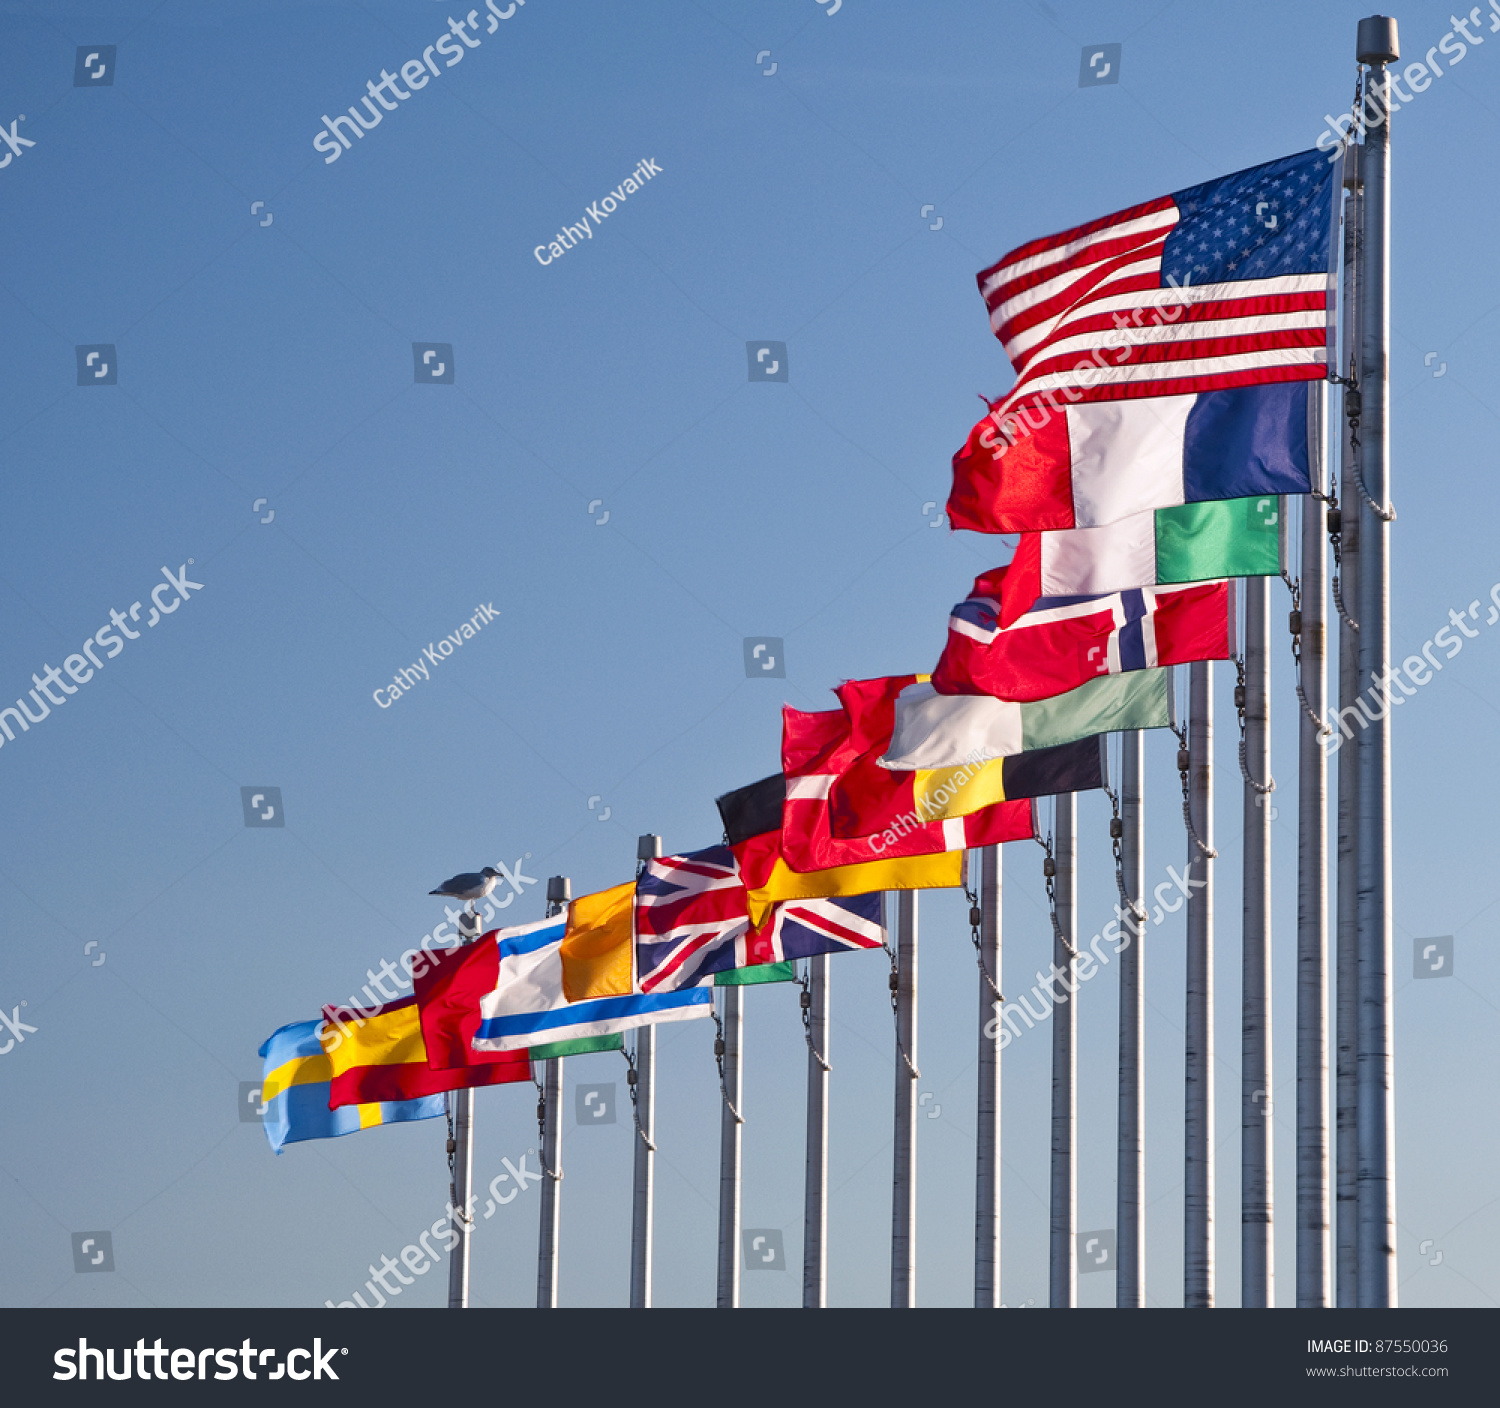 Flags Many Nations Stock Photo 87550036 - Shutterstock